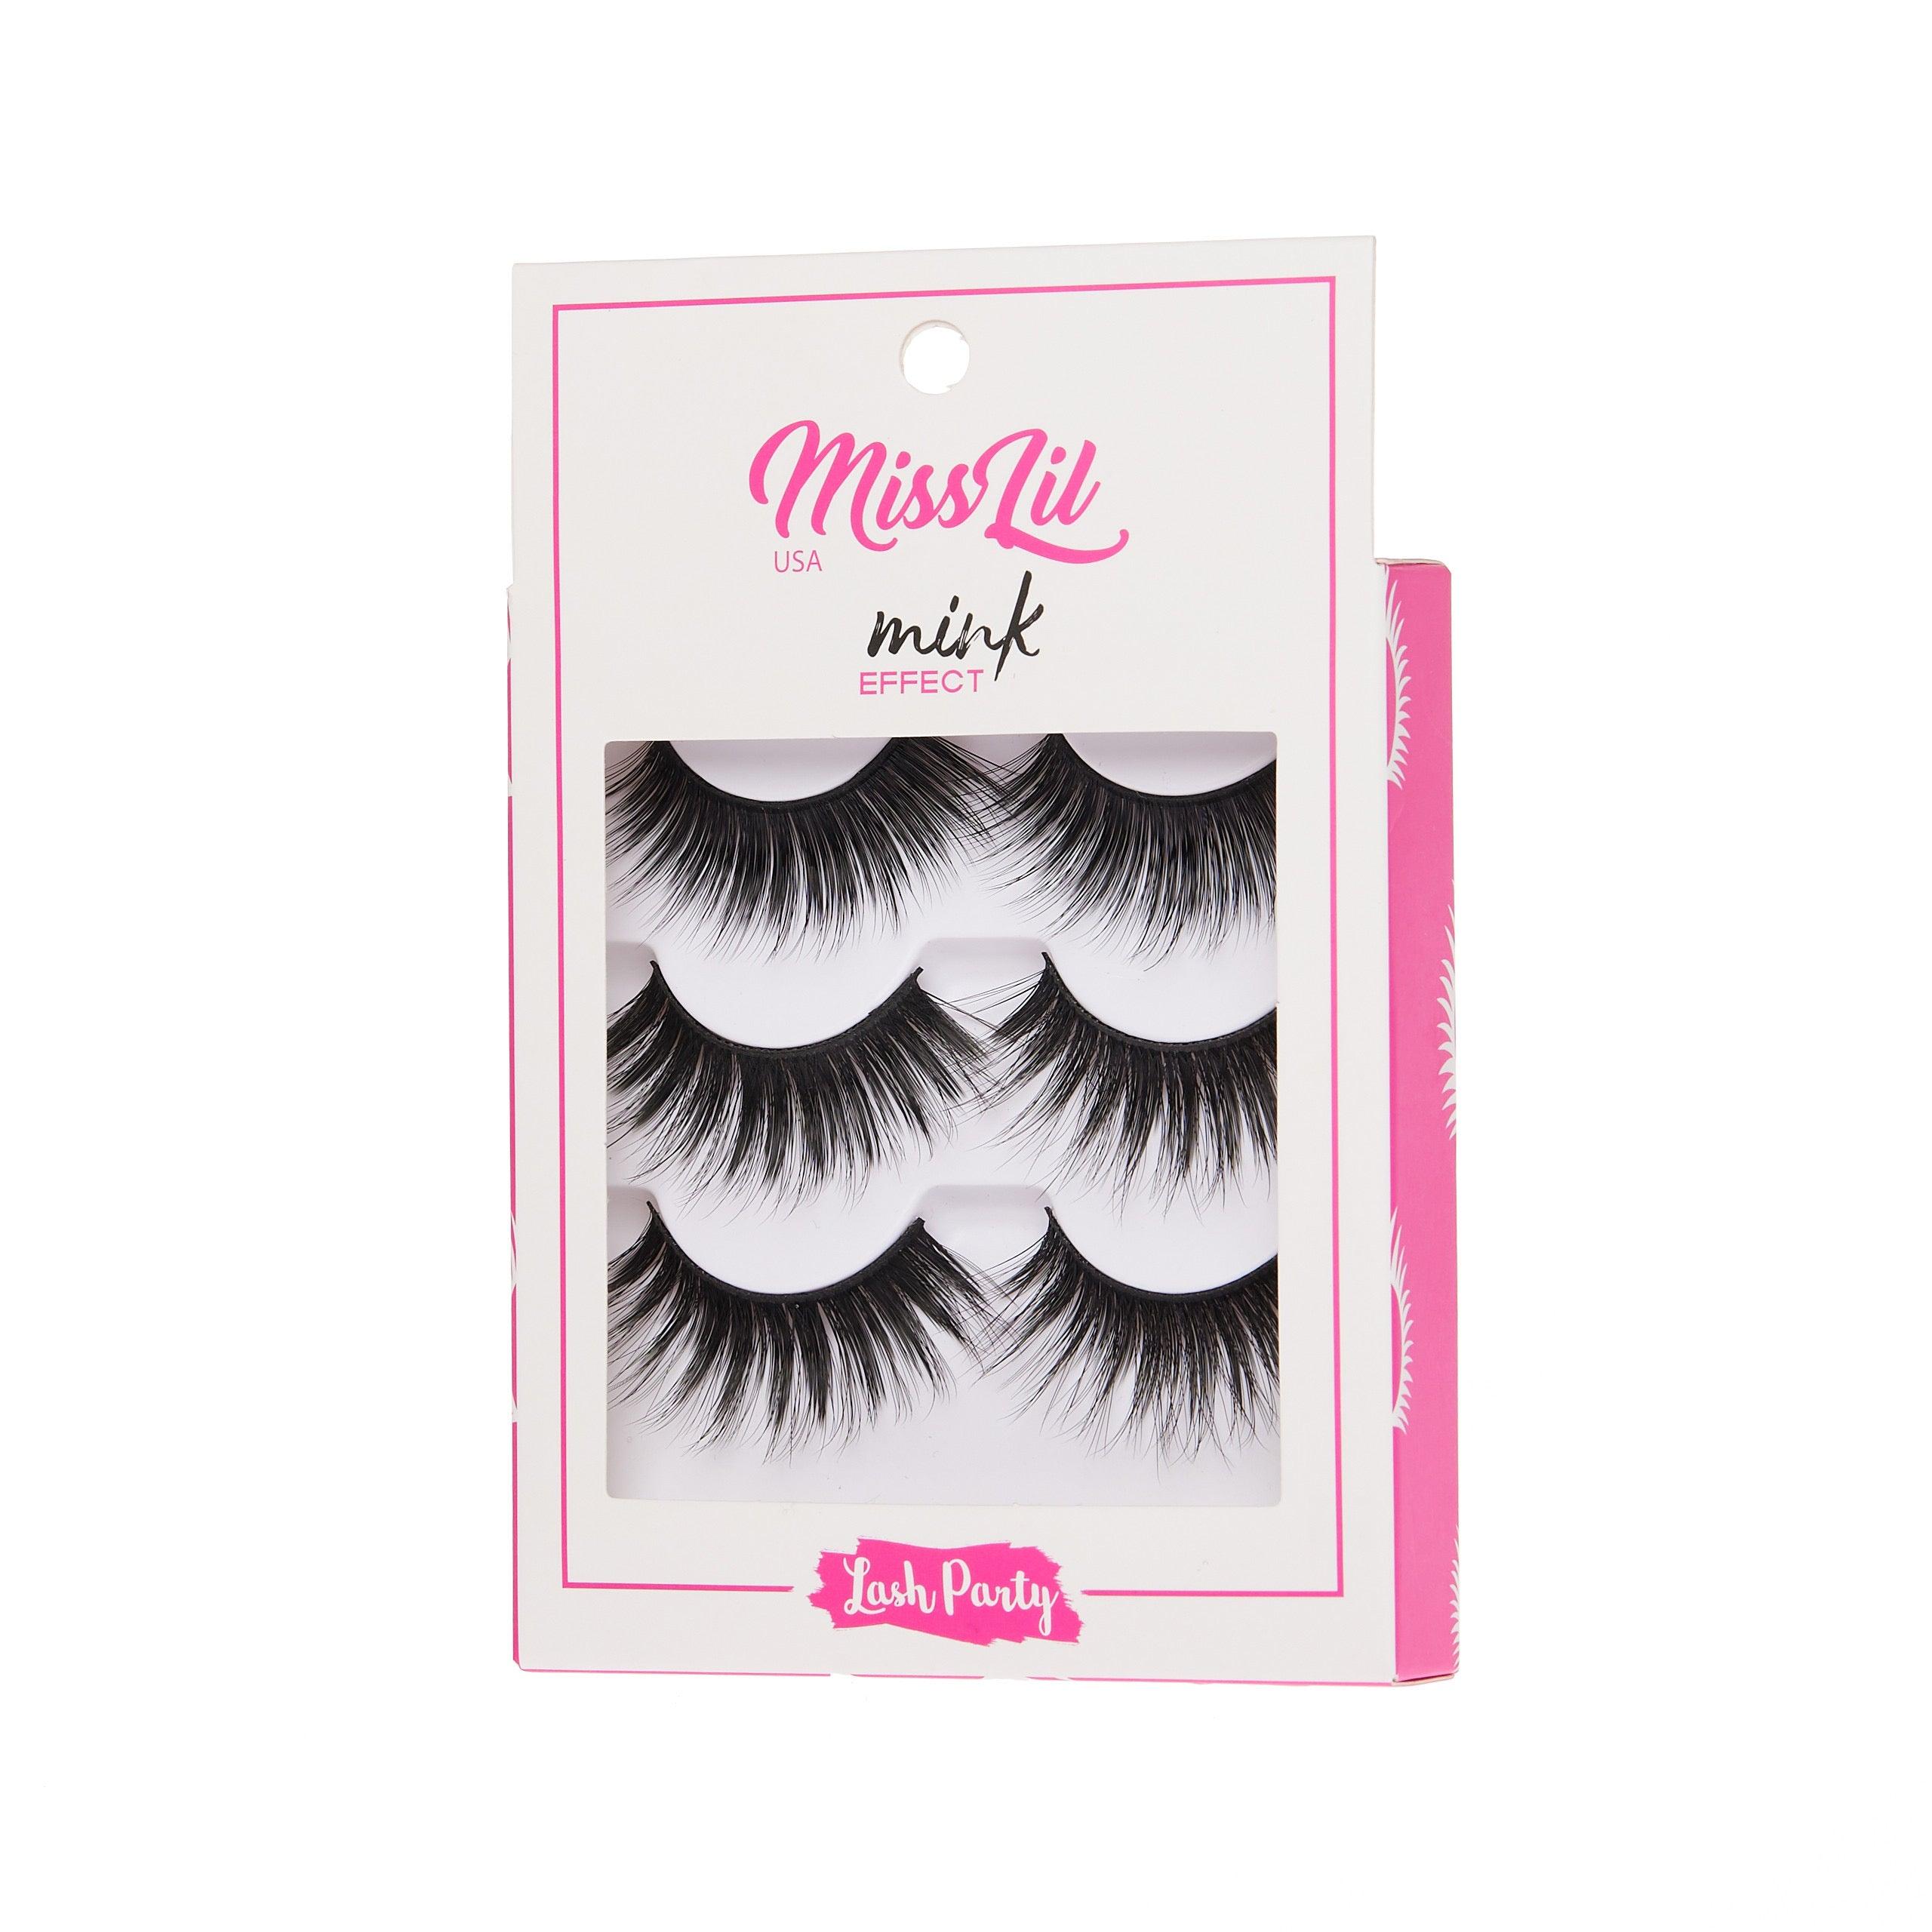 3-Pair Faux Mink Effect Eyelashes - Lash Party Collection #29 - Pack of 3 - Miss Lil USA